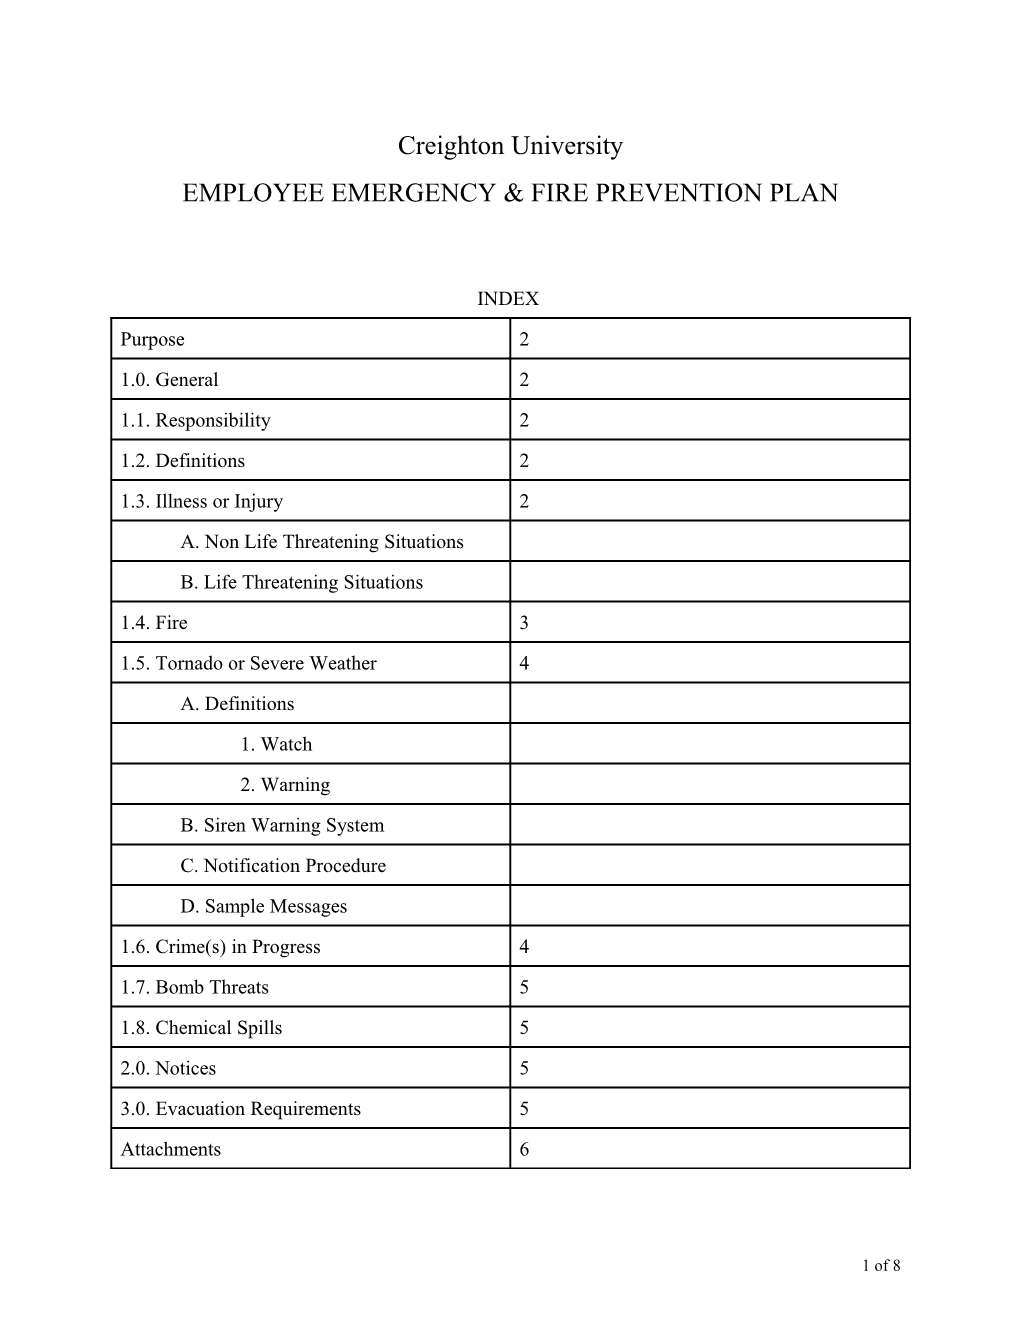 Employee Emergency and Fire Prevention Plan